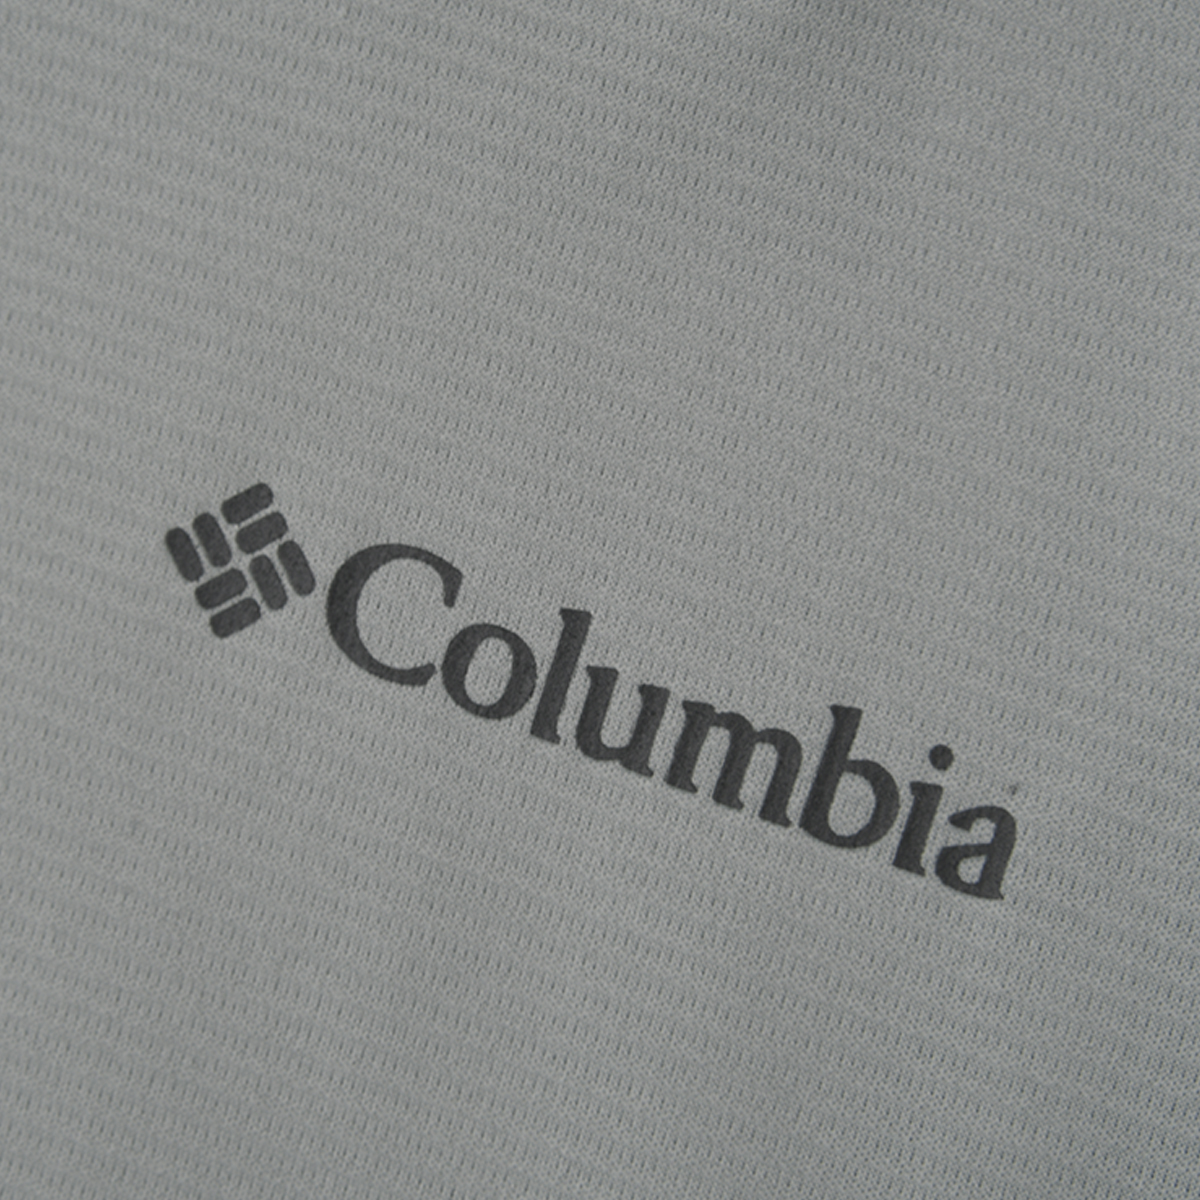 Remera Columbia Hike Polo Hombre,  image number null